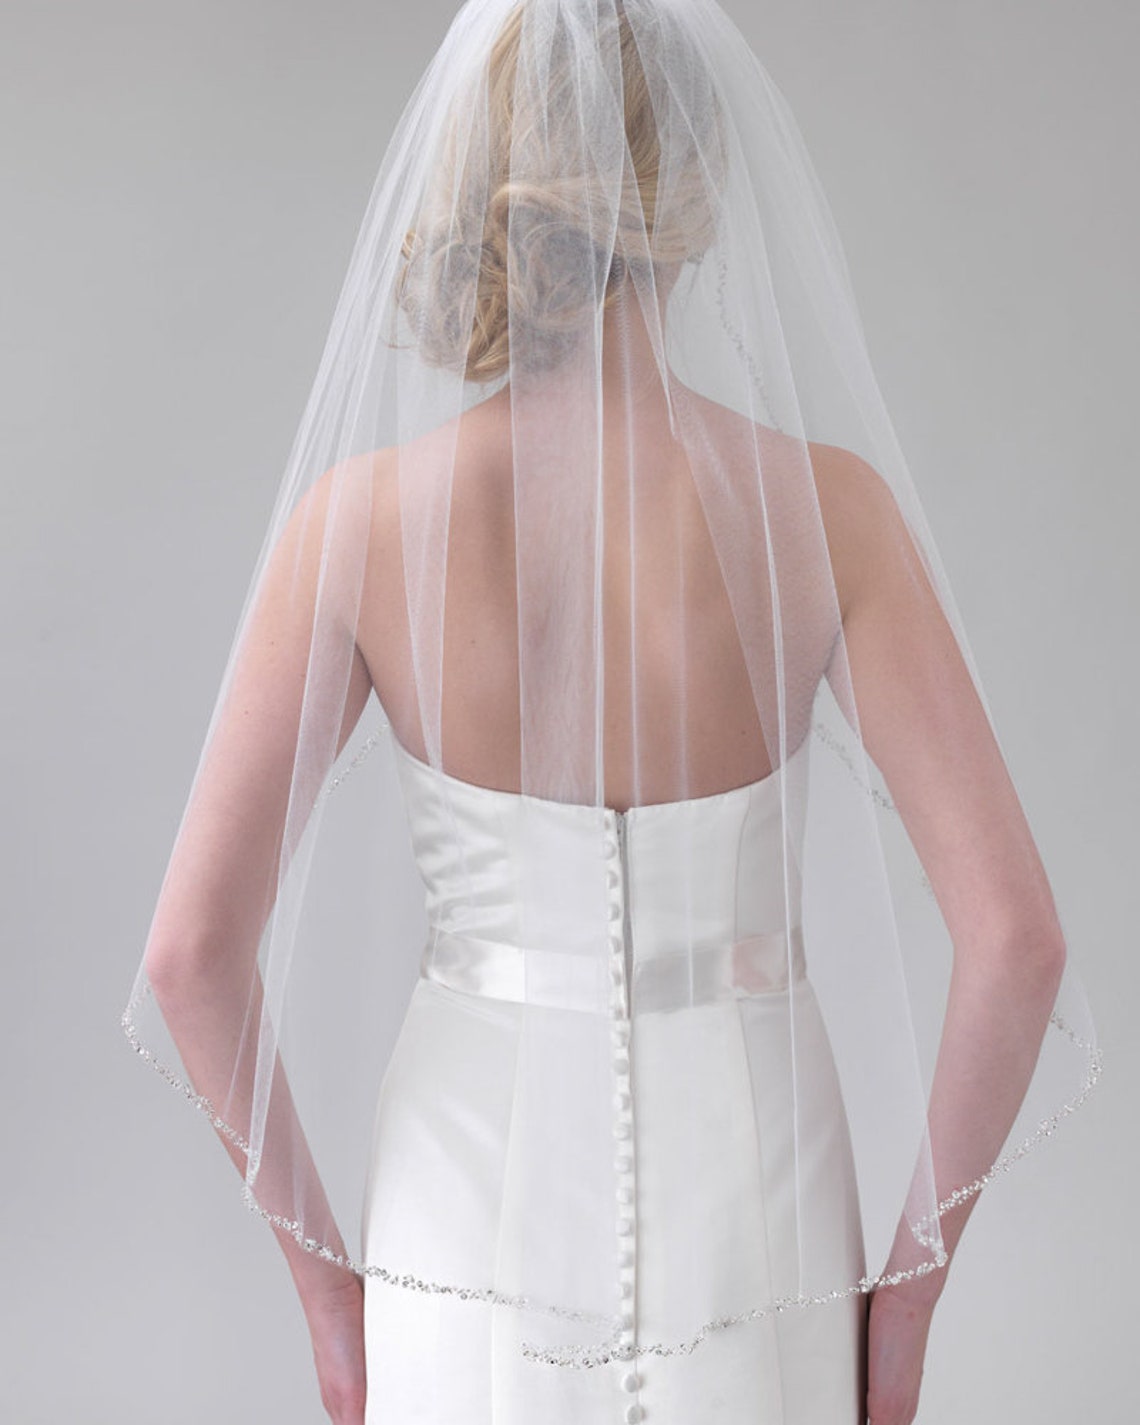 Back view of a bride wearing a white wedding dress from Bergamot Bridal and a Fingertip Length Crystal Beaded Veil, focusing on the detailed button closure of the dress.